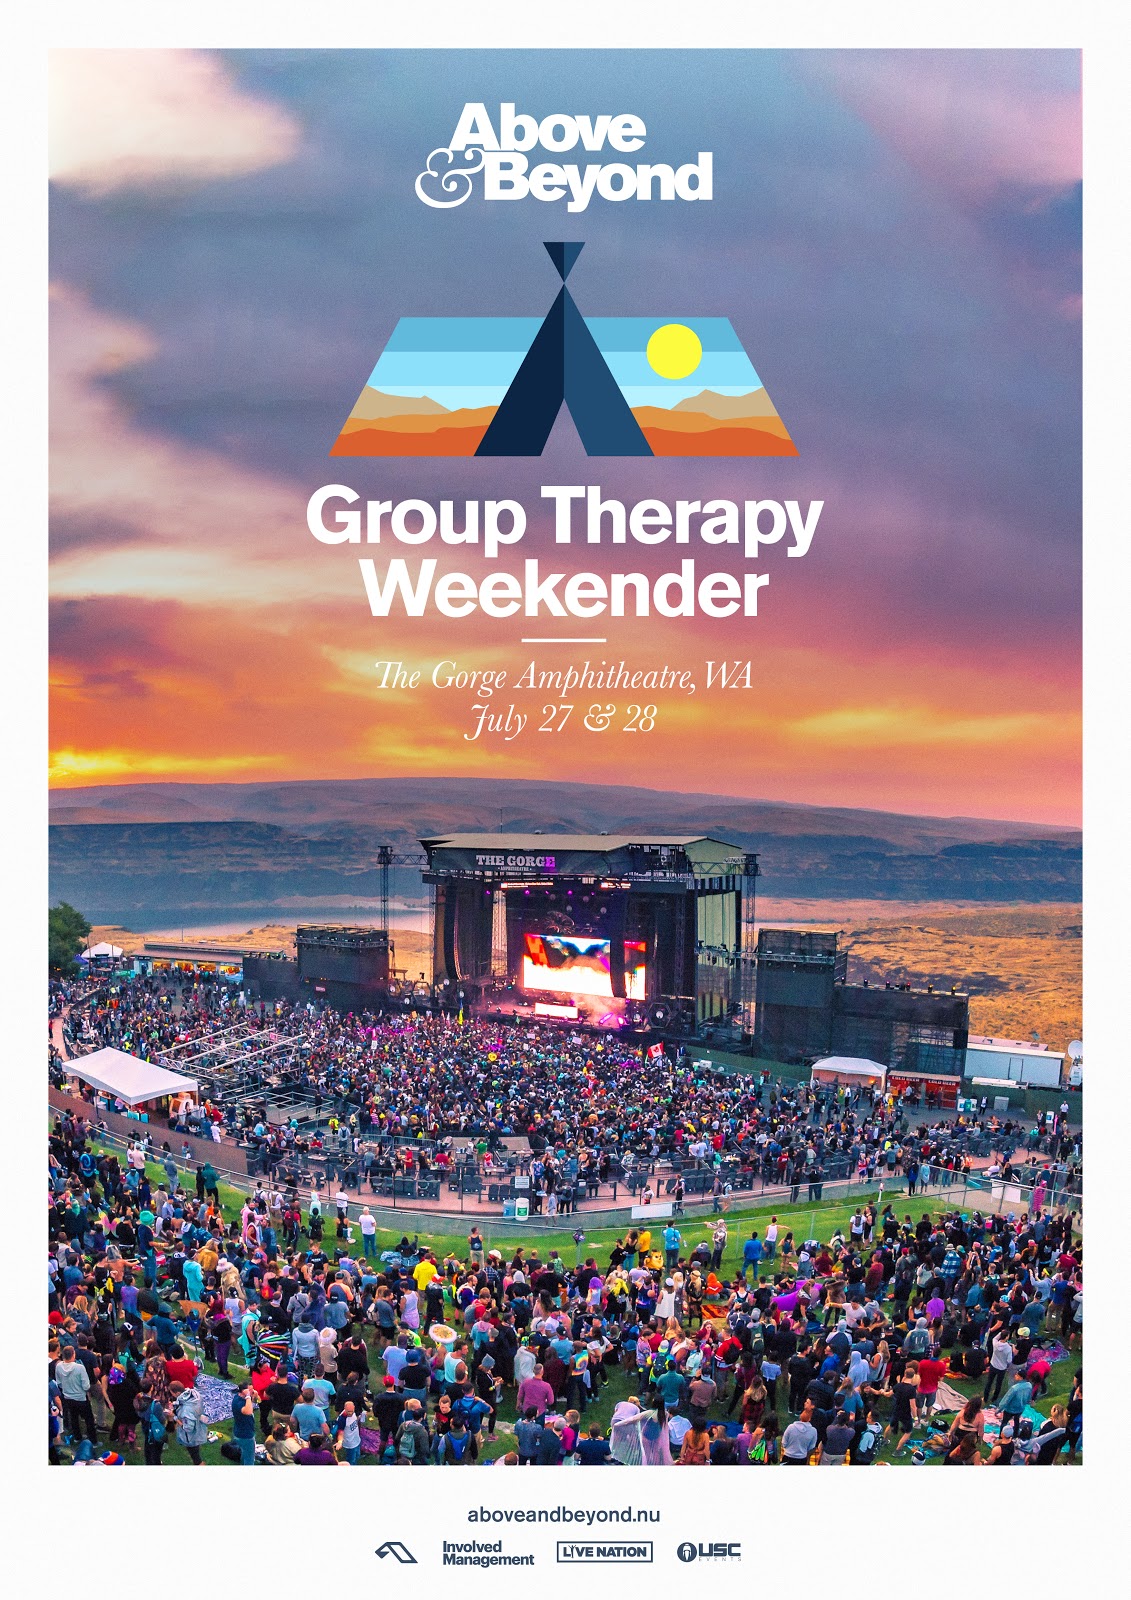 Above and Beyond presents Group Therapy Weekender at The Gorge Amphitheatre, Washington, US on 27th and 28th July 2019